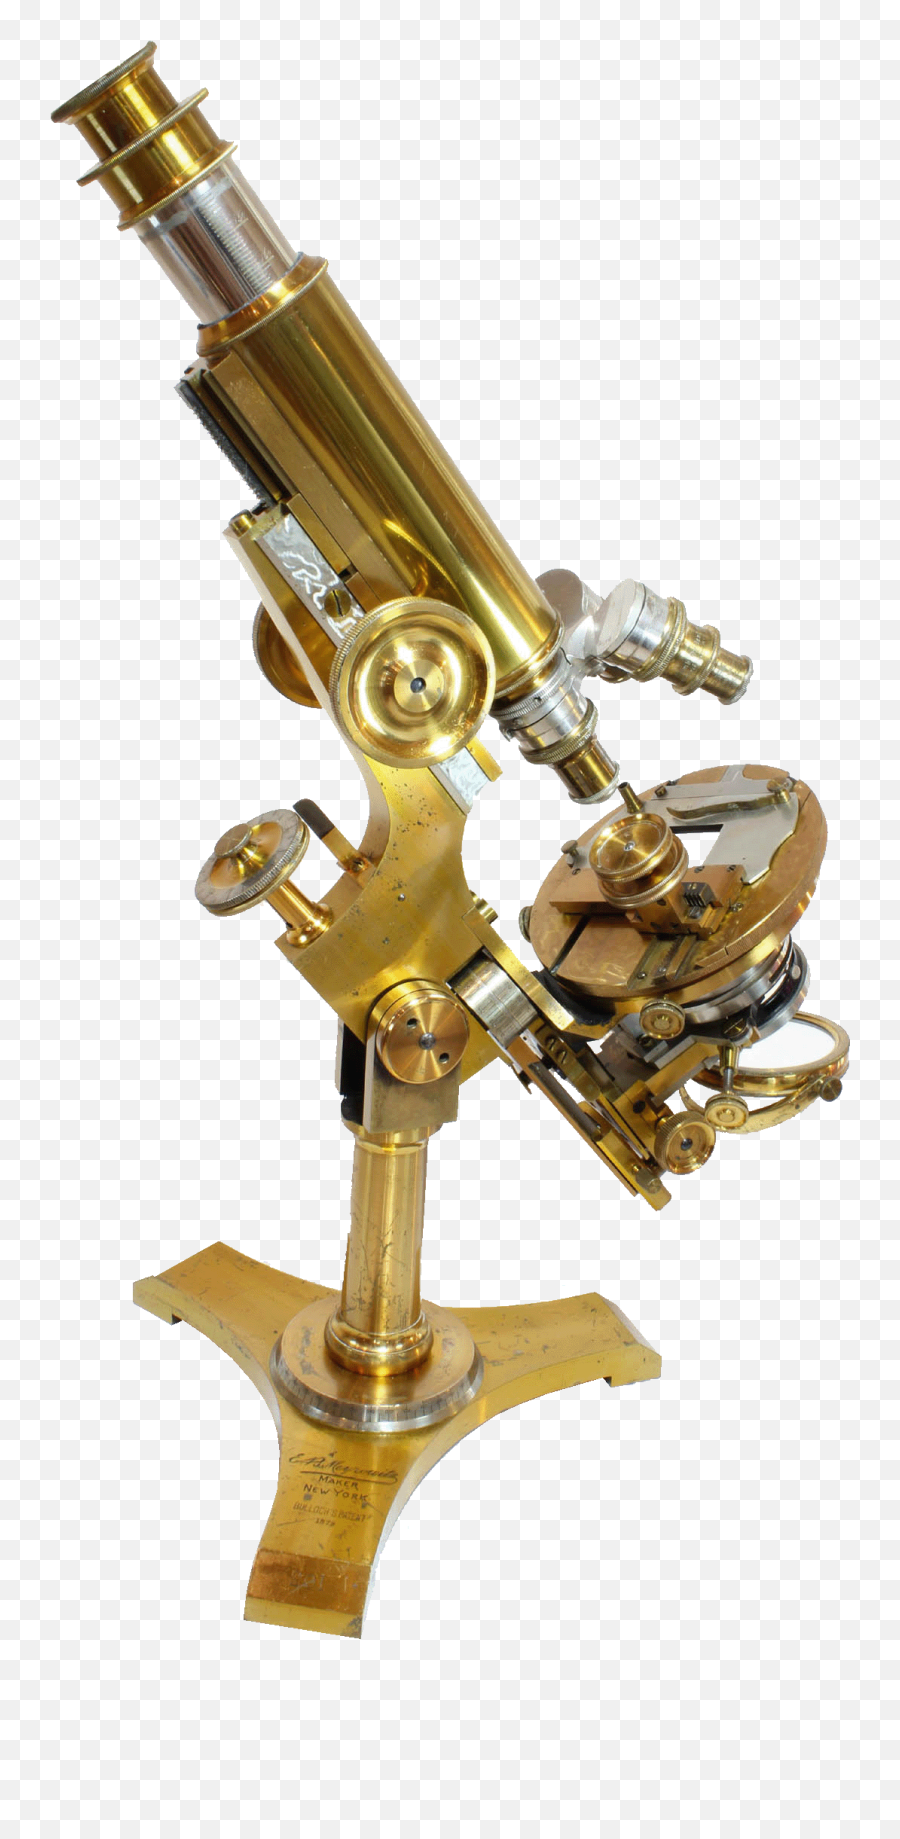 Microscope Clipart Old Microscope - Evoulition Of Microscope Gif Emoji,Microscope Emoji